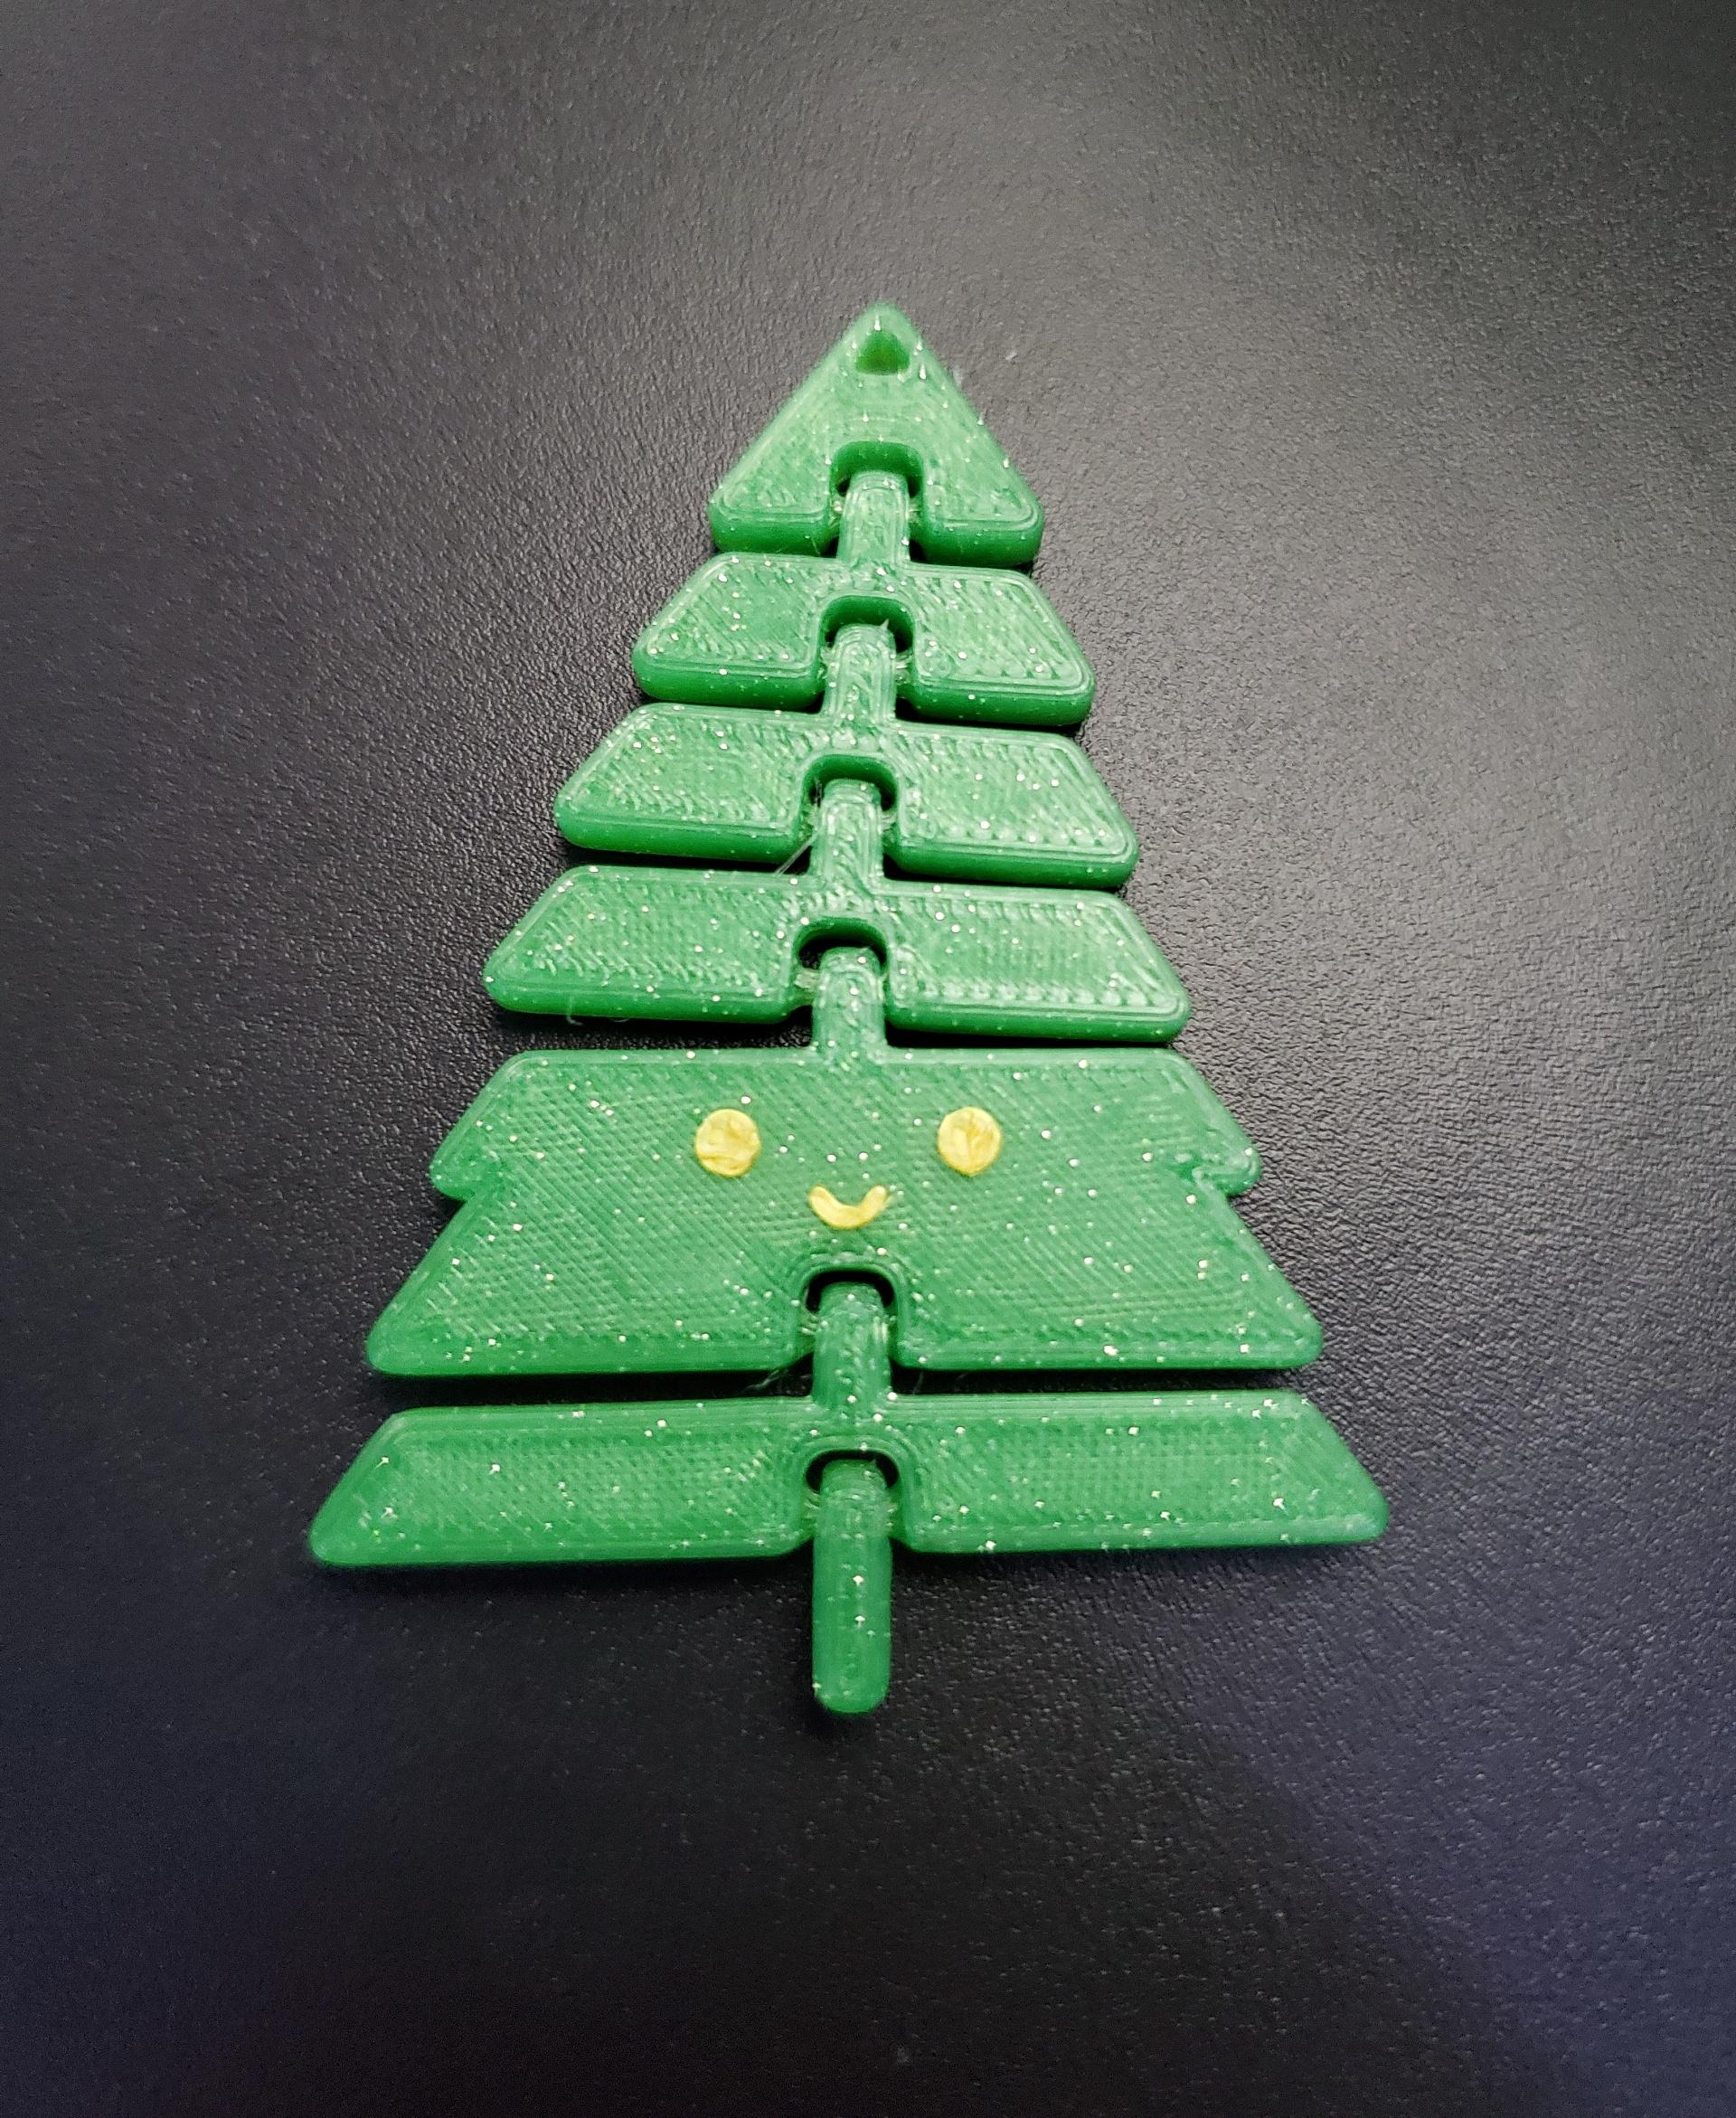 Articulated Kawaii Christmas Tree Keychain - Print in place fidget toy - 3mf - protopasta fleck n forest green - 3d model